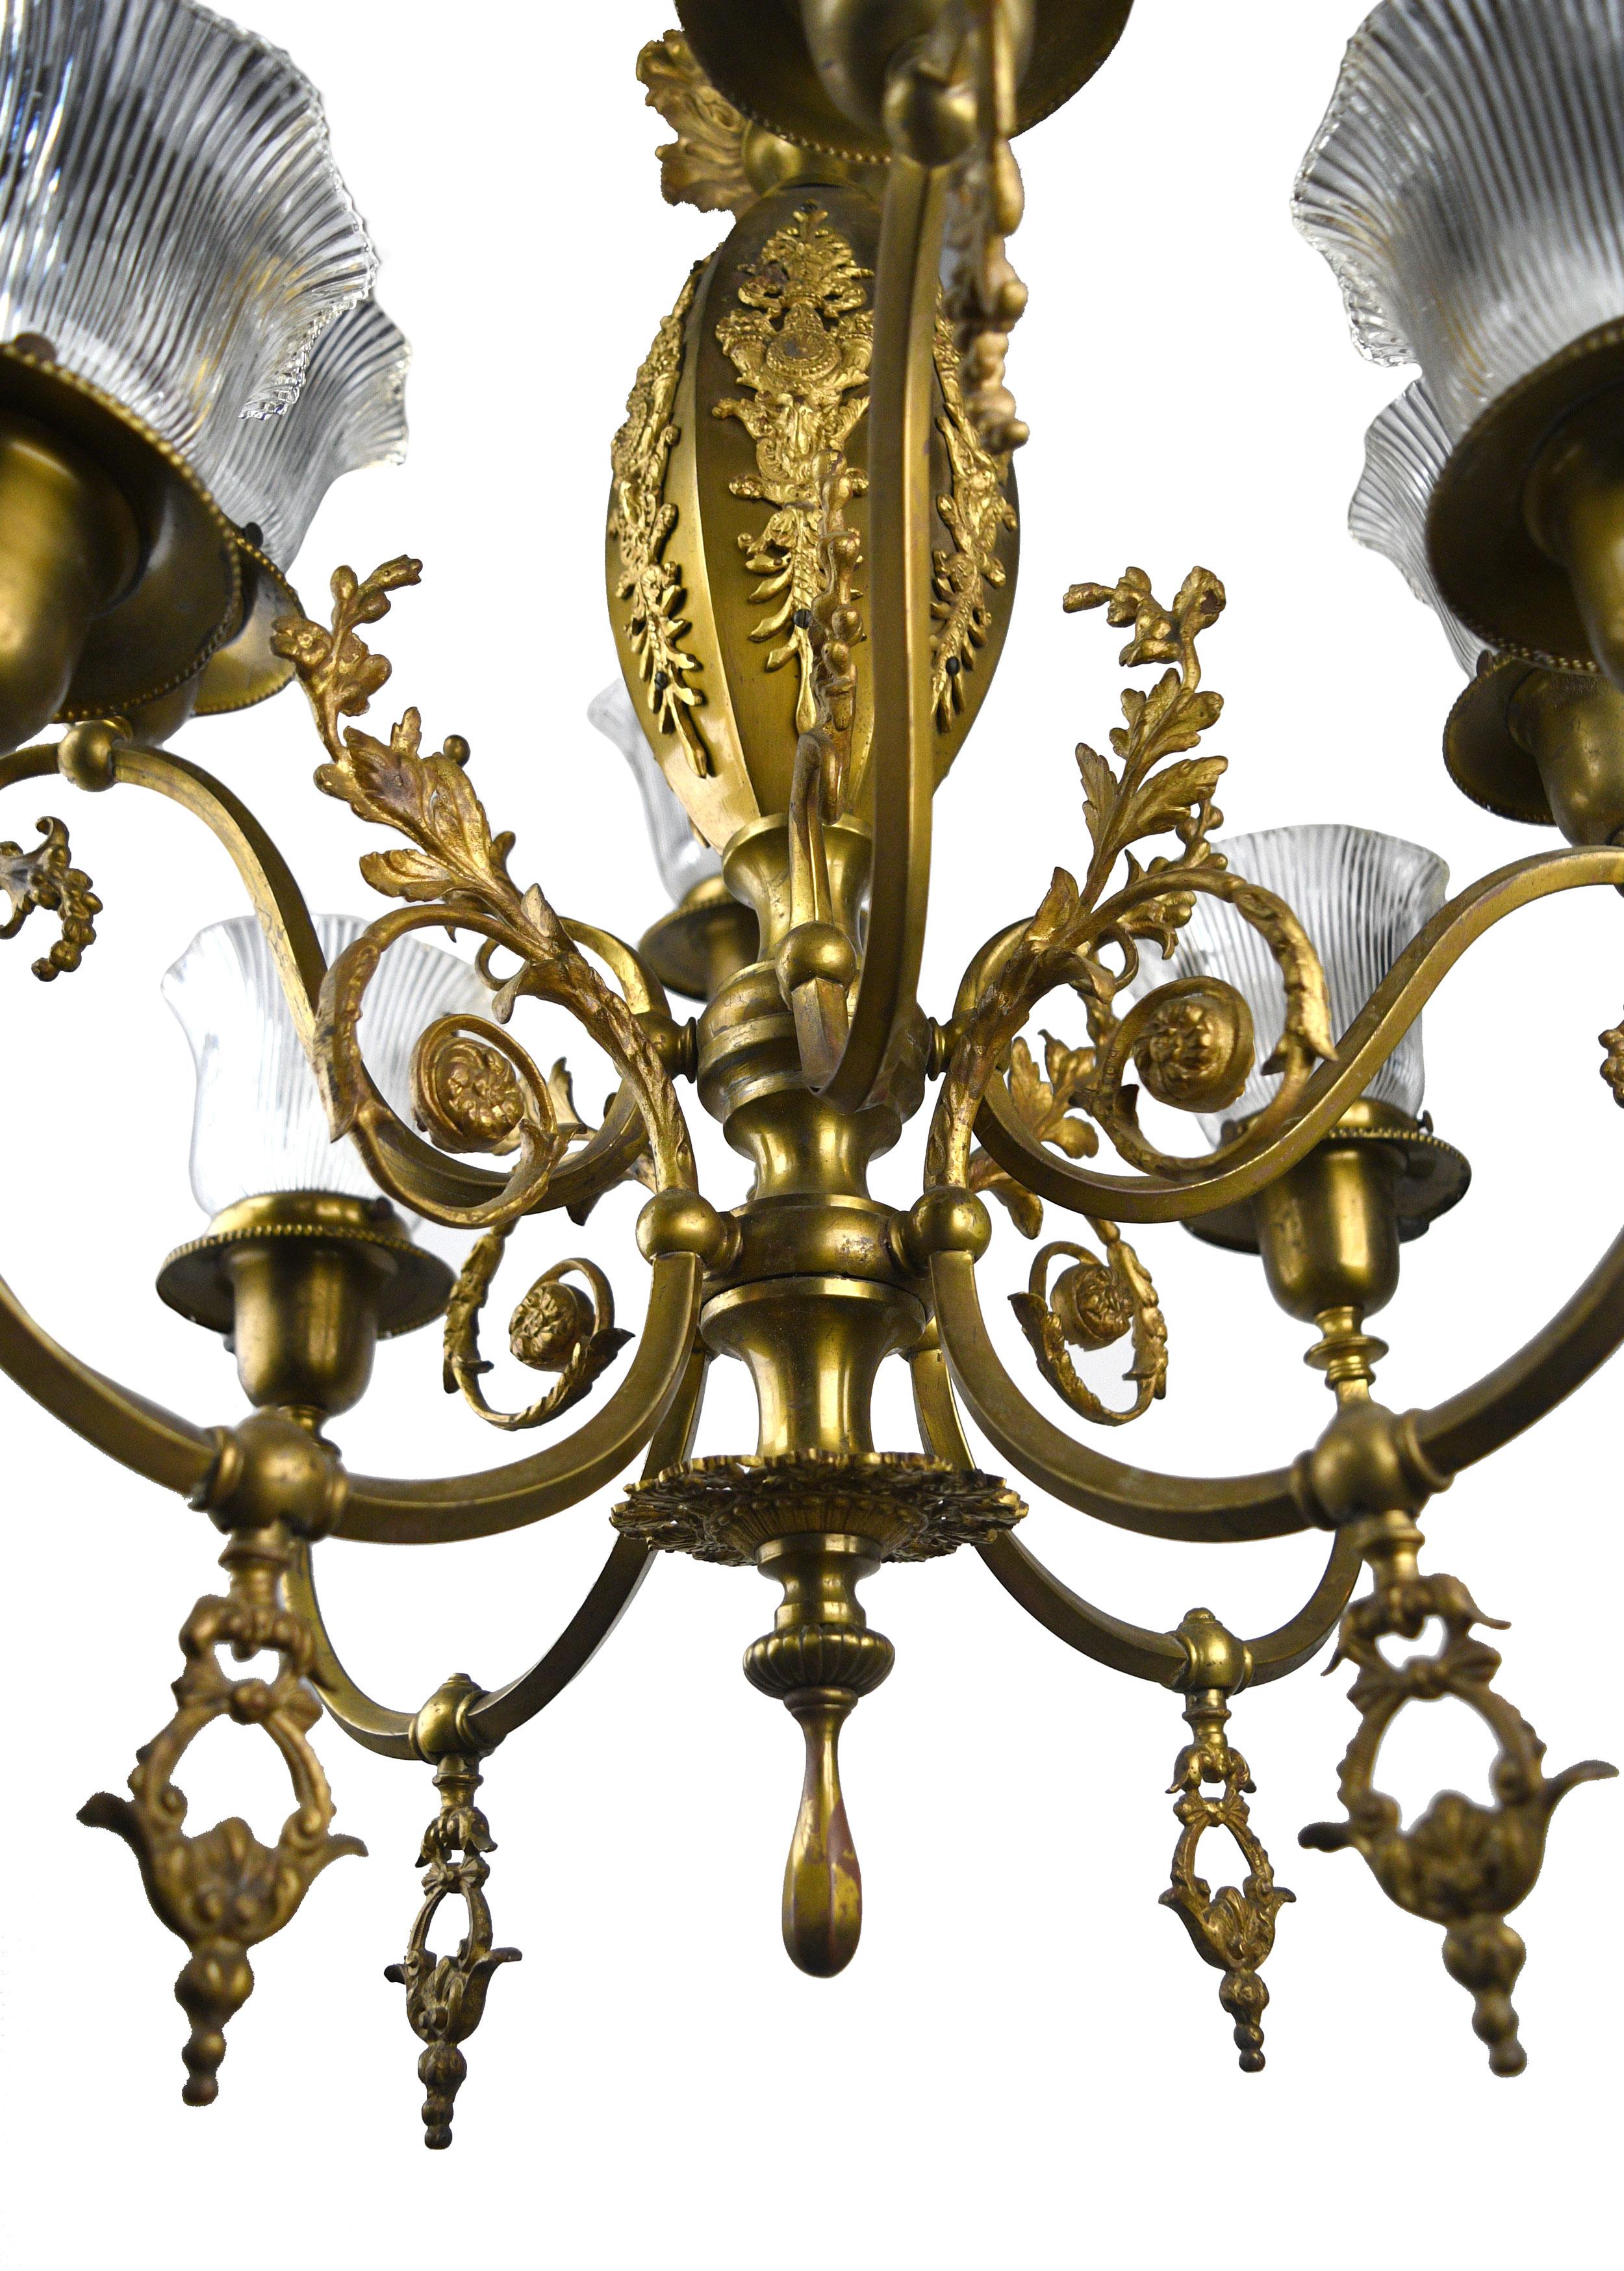 This stunning brass gas/electric chandelier features intricate floral details and a handsomely crafted winding brass design. The eight lights of this chandelier give off ample illumination!

Circa: 1910
Condition: Very good 
Finish: